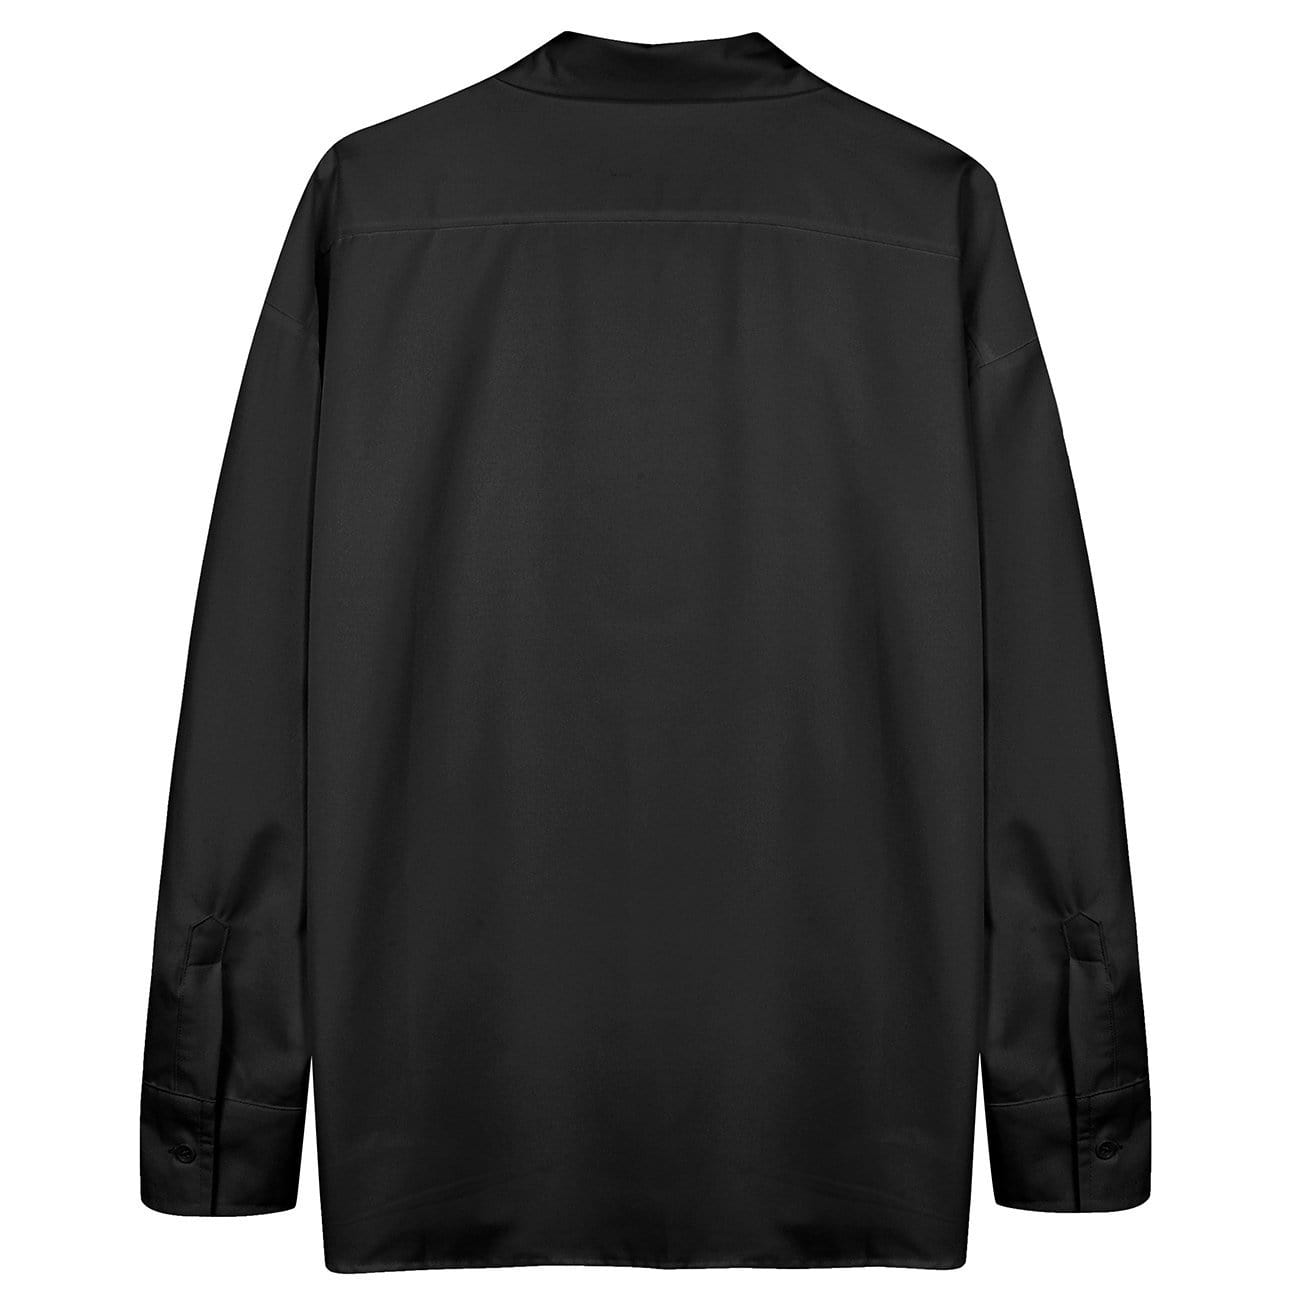 Pure Color Hanging Chain Oversized Long Sleeve Shirt Streetwear Brand Techwear Combat Tactical YUGEN THEORY